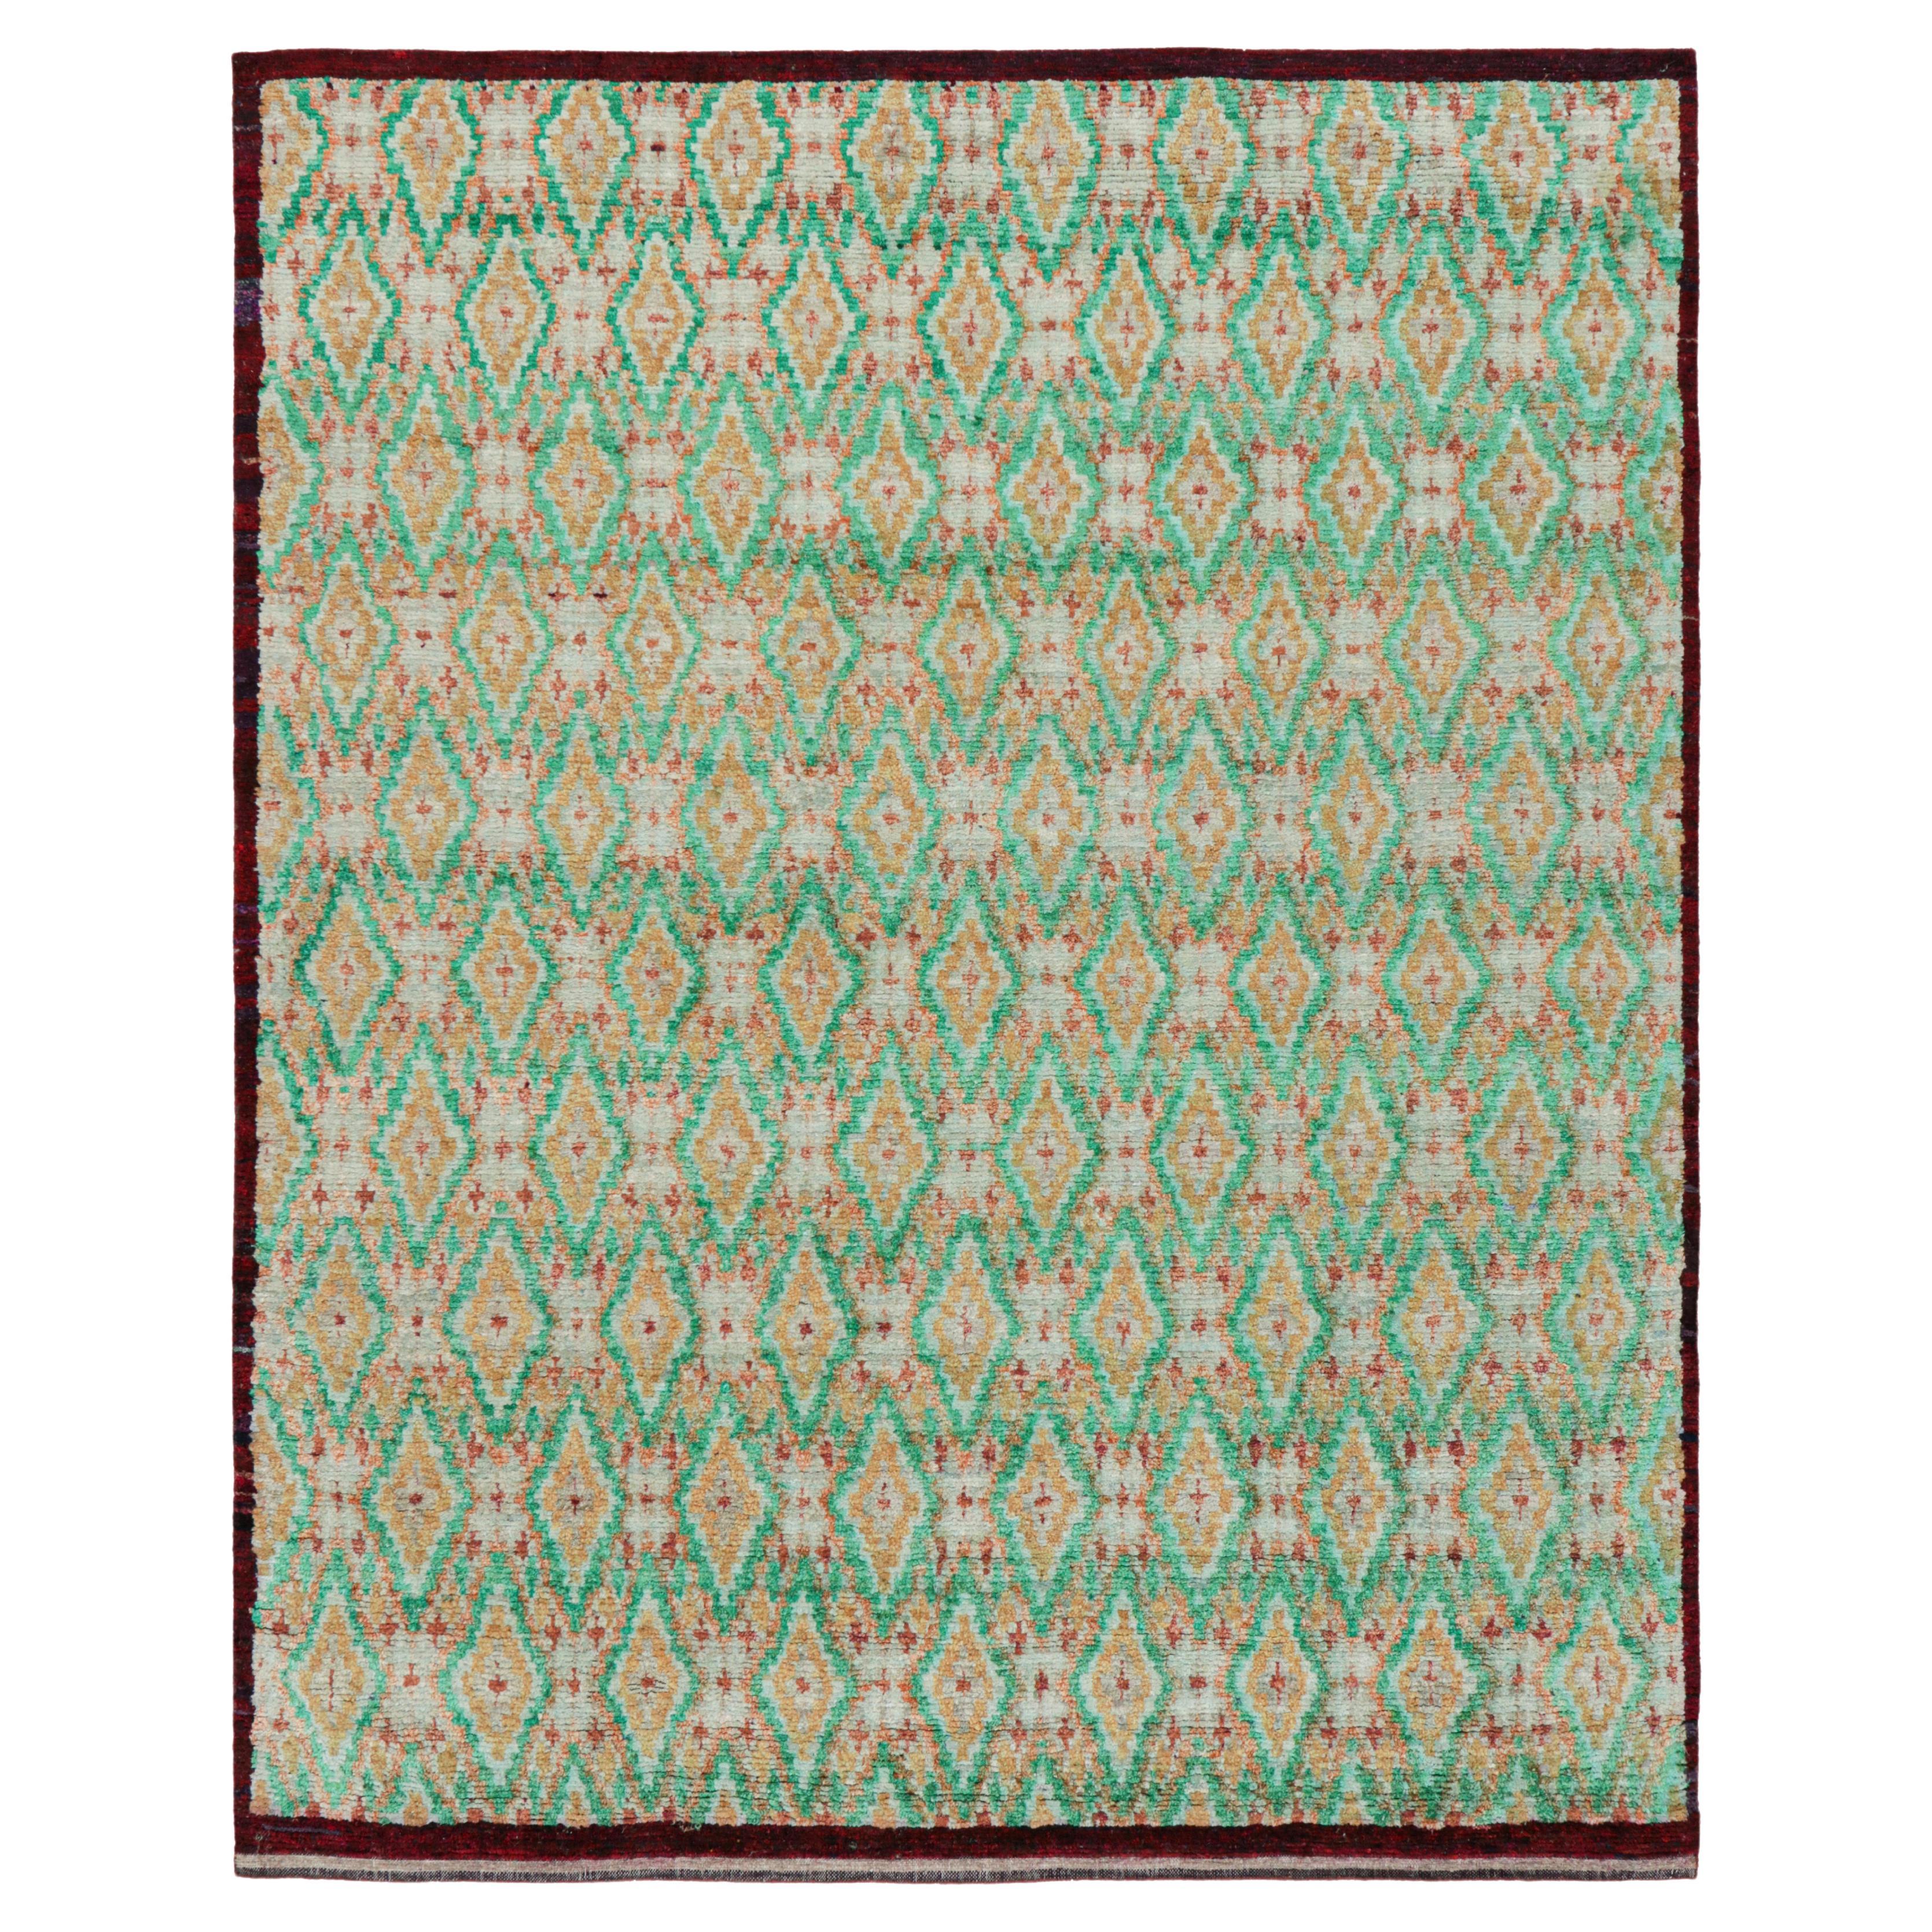 Rug & Kilim’s Moroccan Style Rug in Green and Gold Diamond Patterns